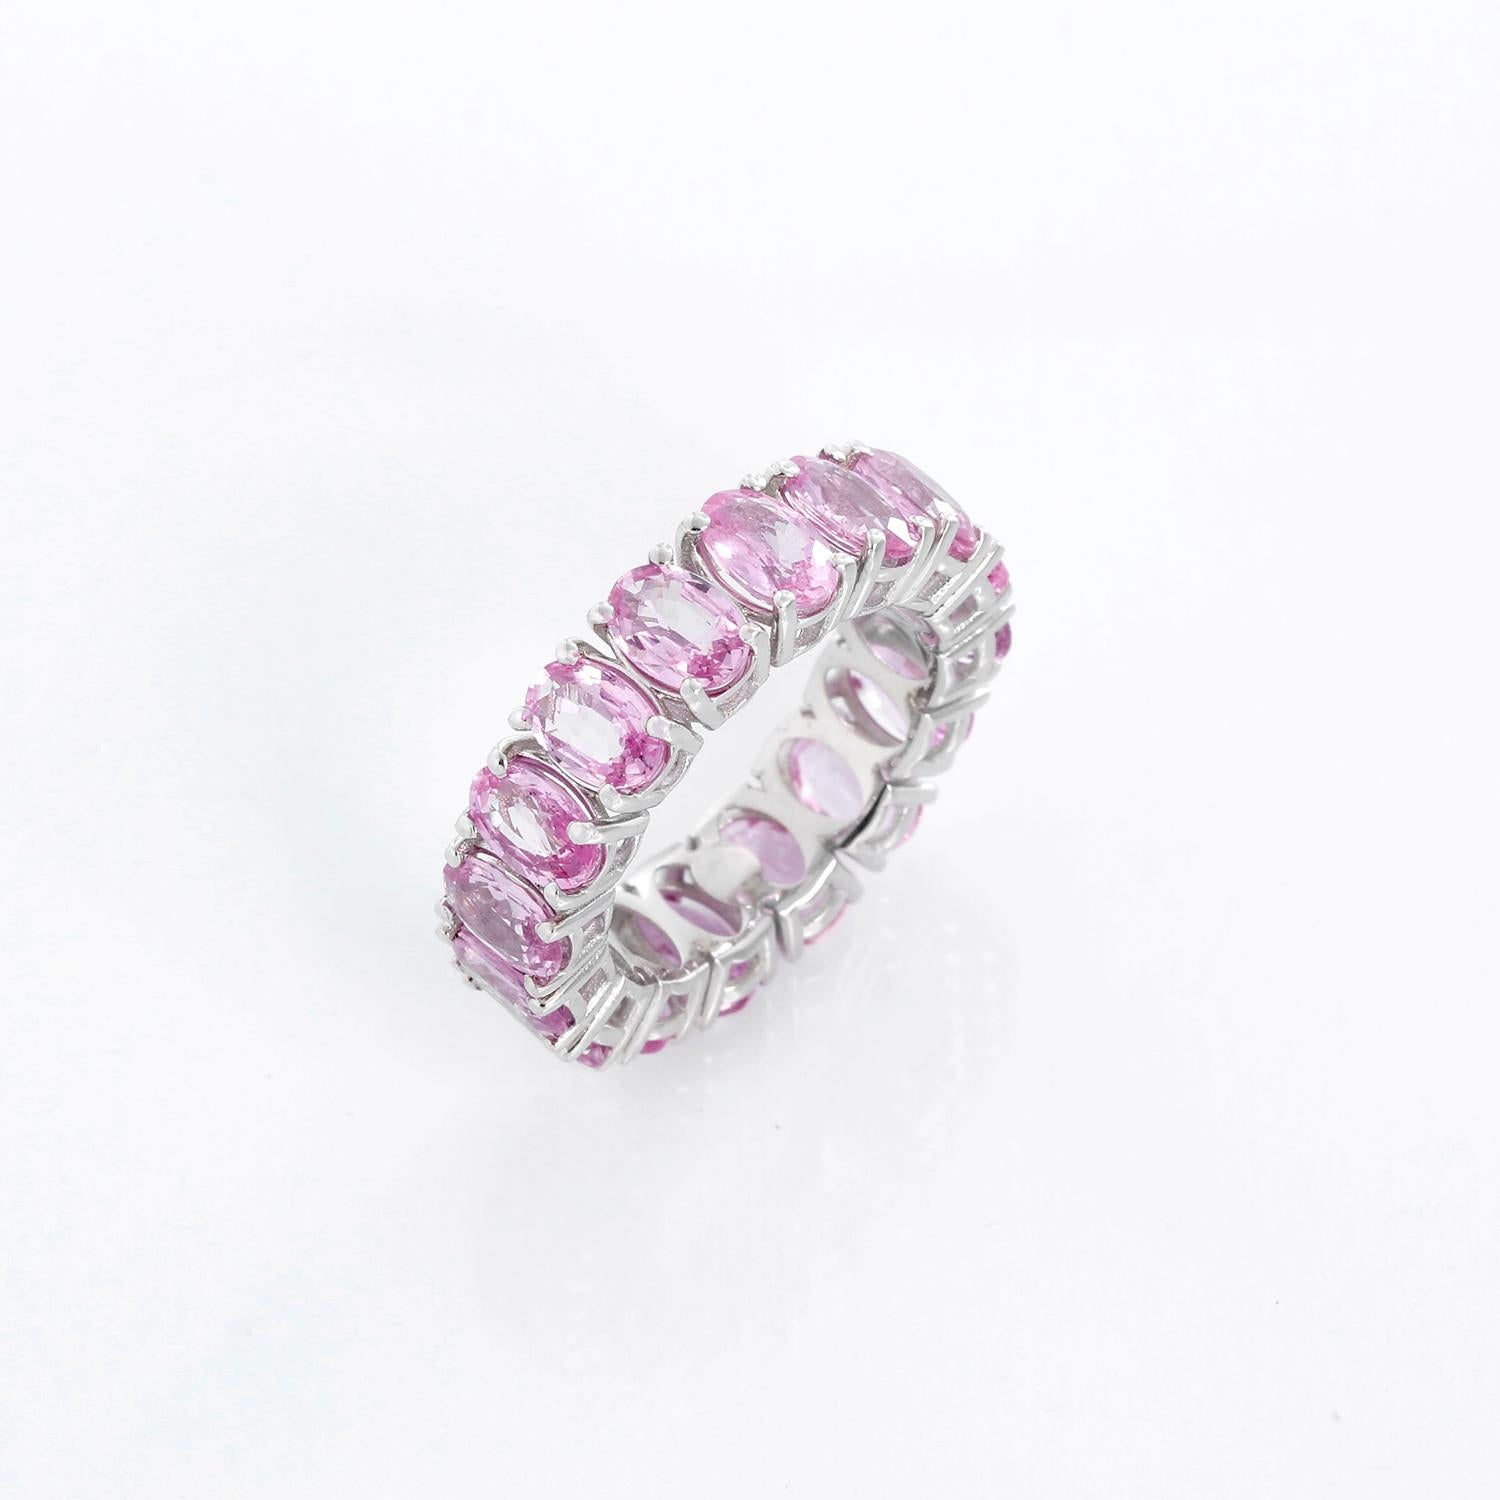 18K White Gold Pink Sapphire Eternity Band Size 7 - Truly stunning eternity band with oval pink sapphires equaling 8.81 cts.  Total weight 6.5 grams. Size 7. Radiant wedding band, perfect for that special person in your life.